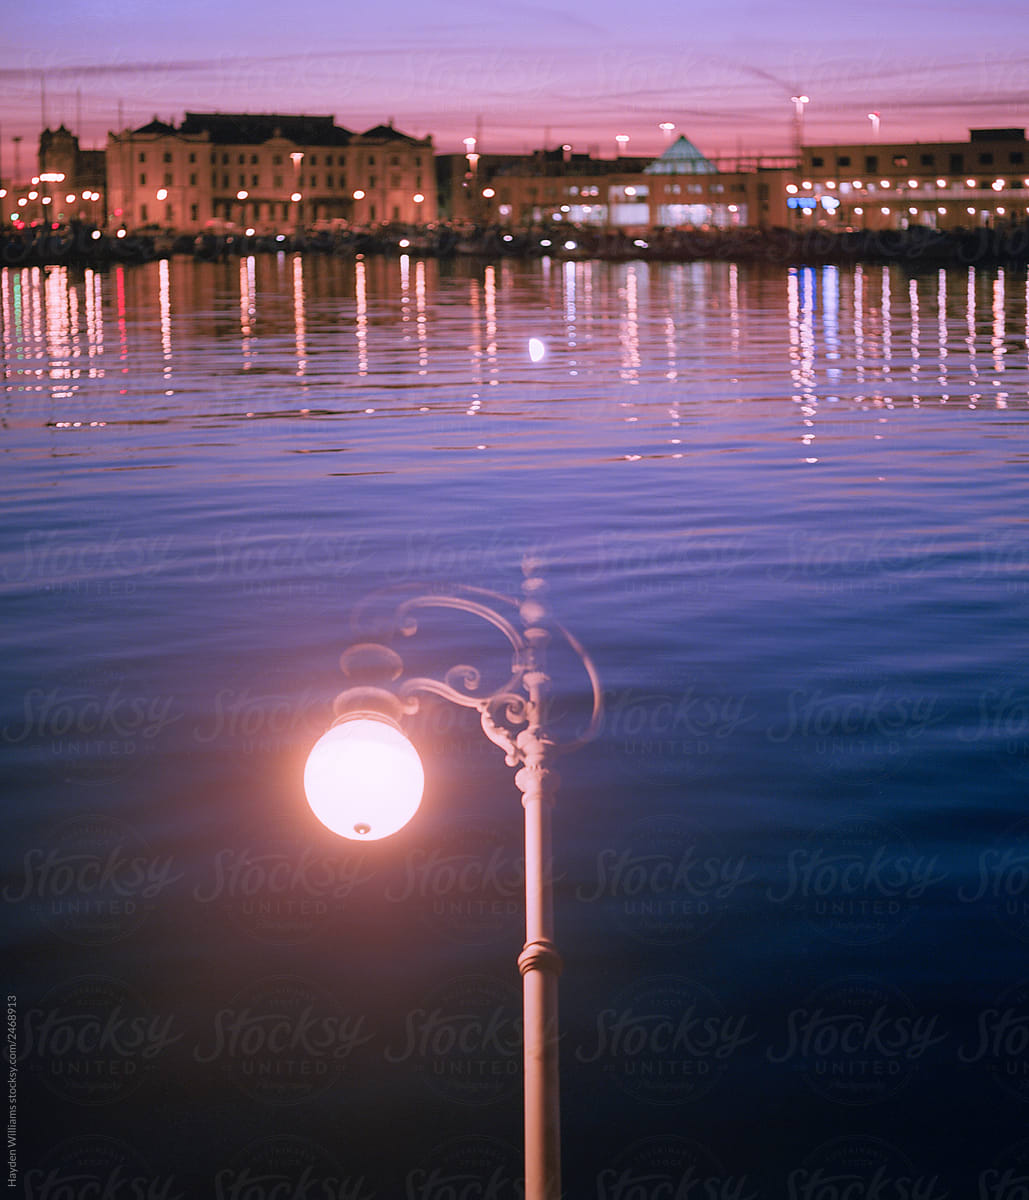 Night City over water behind street lamp